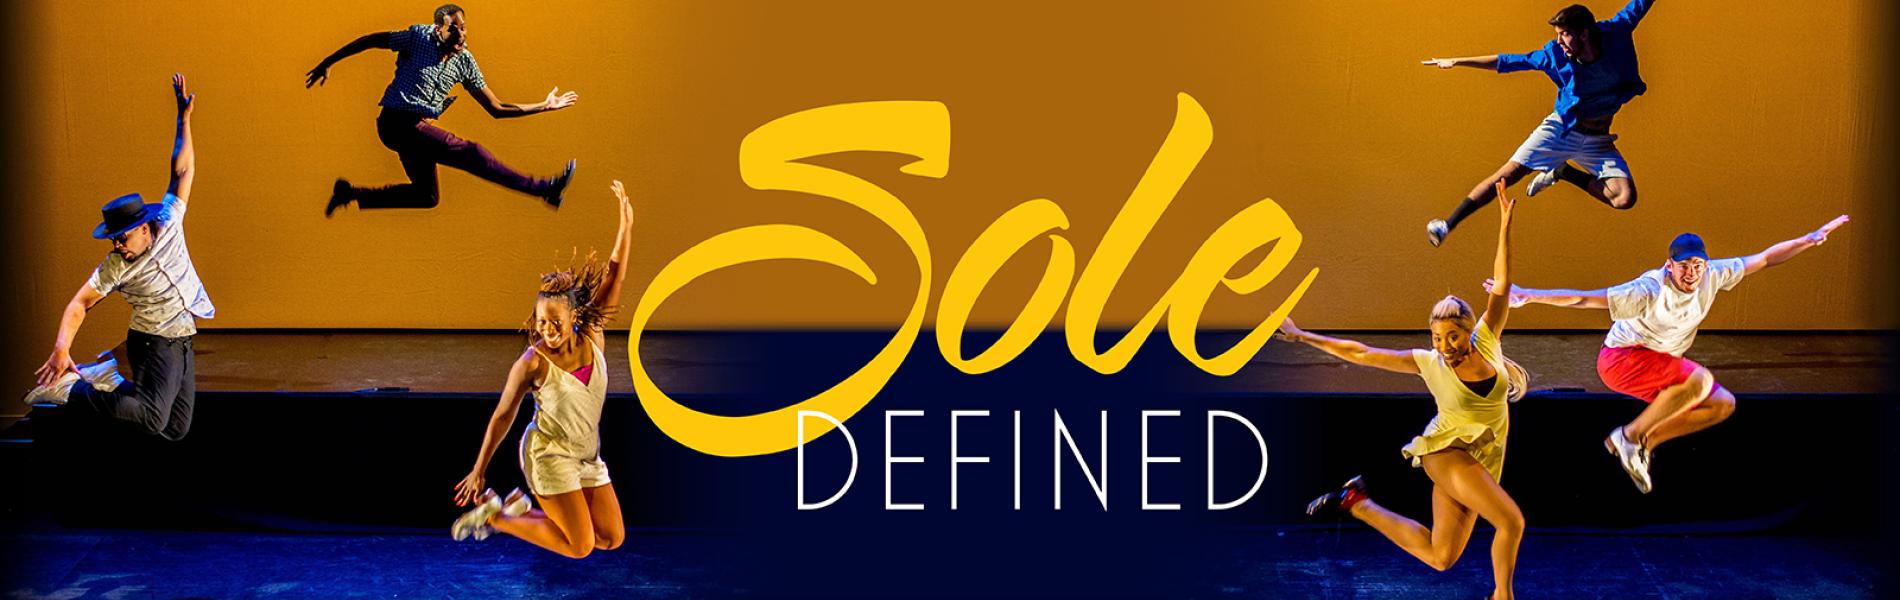 SOLE Defined